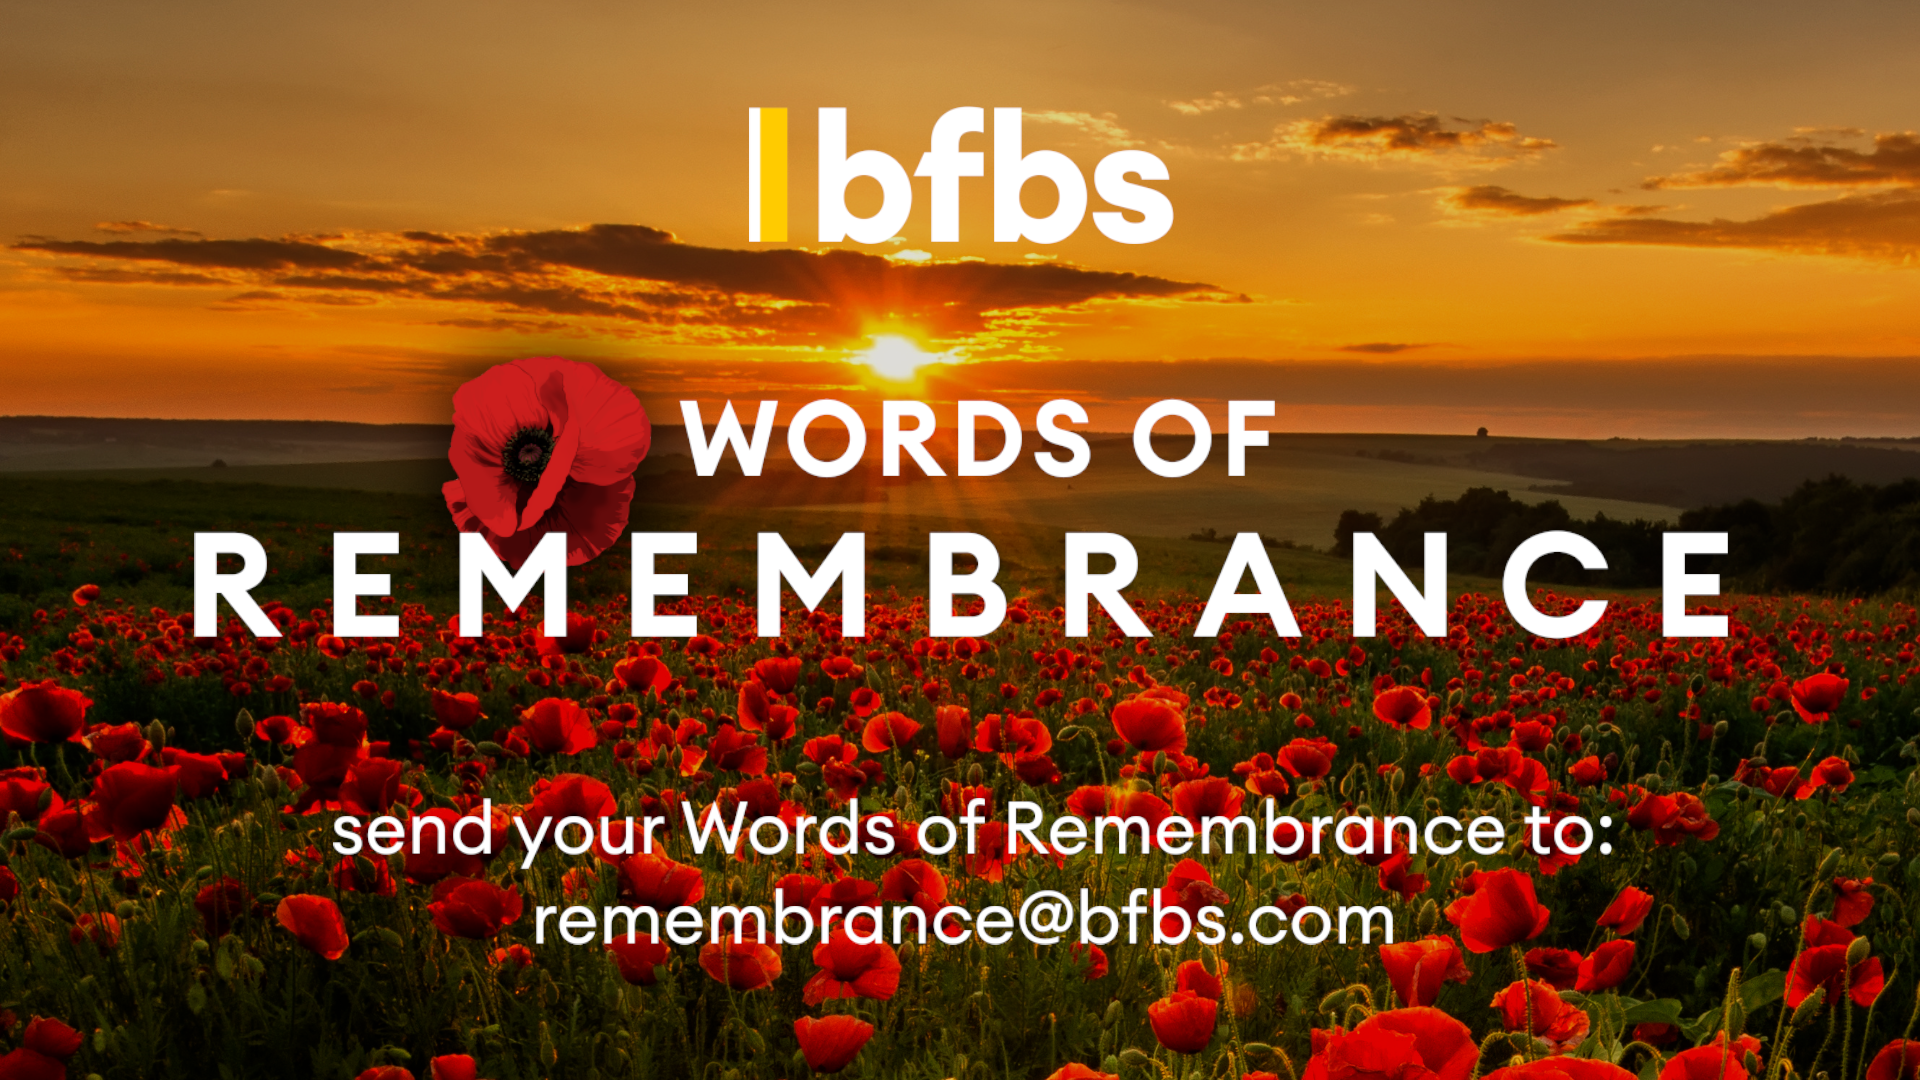 BFBS Invites The Military Community To Participate In Its Virtual Act Of Remembrance